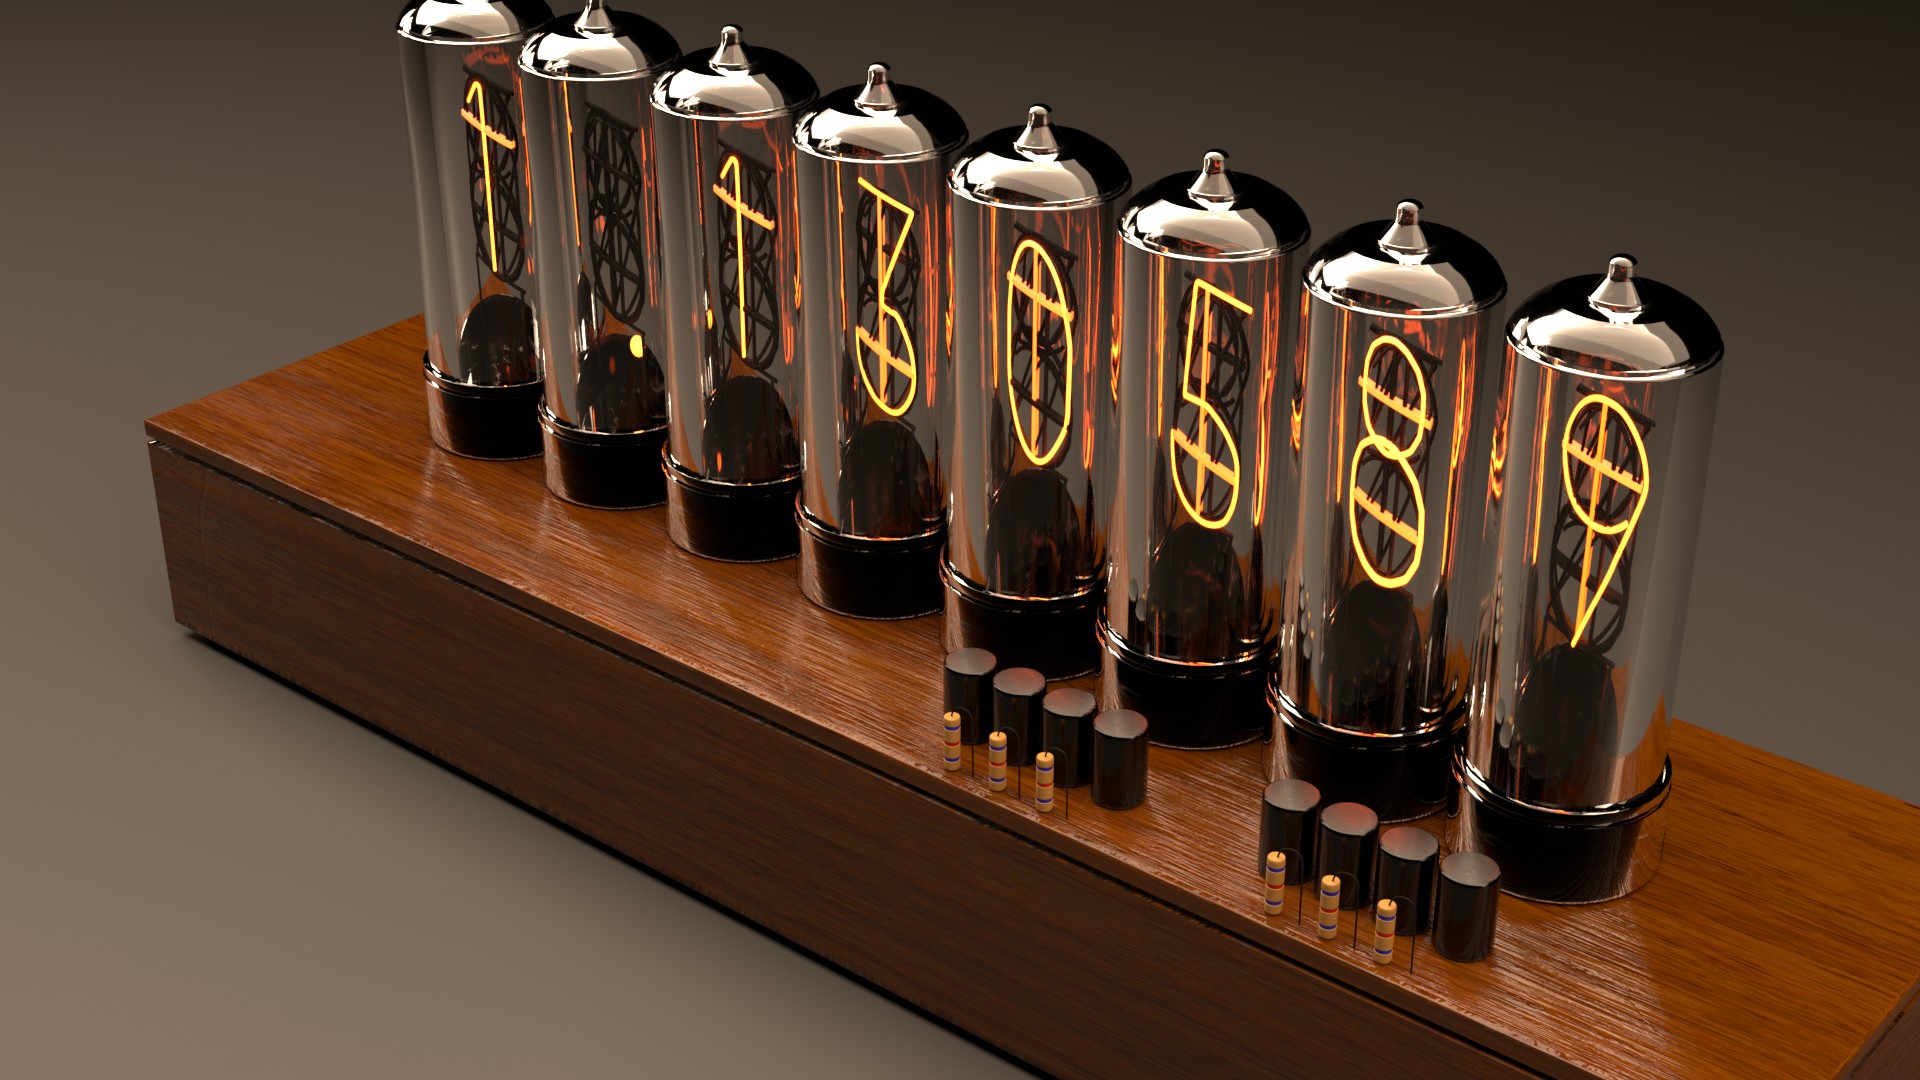 Steins Gate Divergence meter animation - Finished Projects - Blender  Artists Community